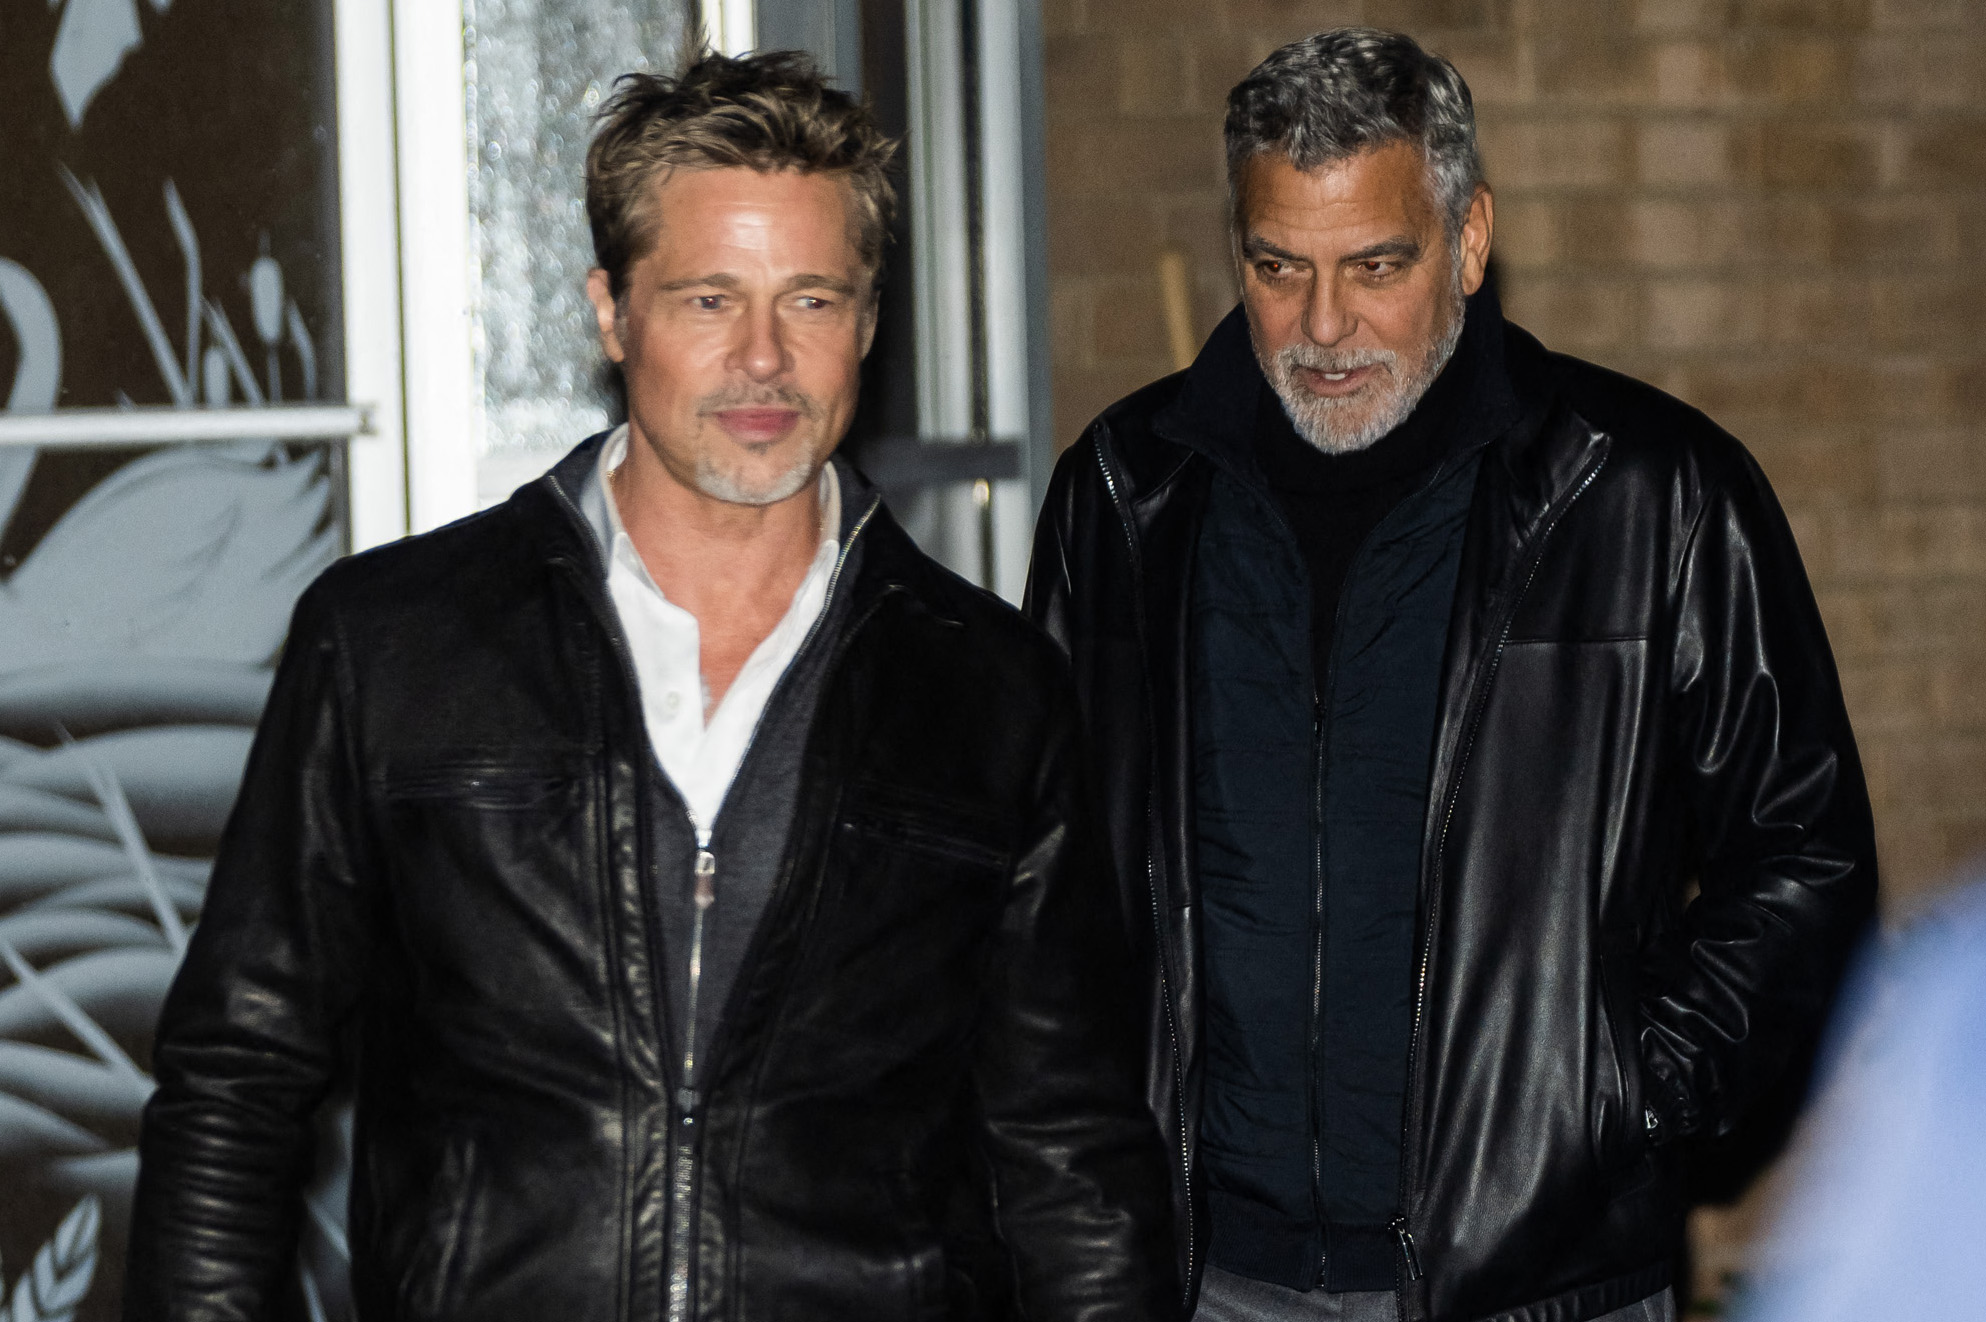 In New York, George Clooney and Brad Pitt won’t let go of each other